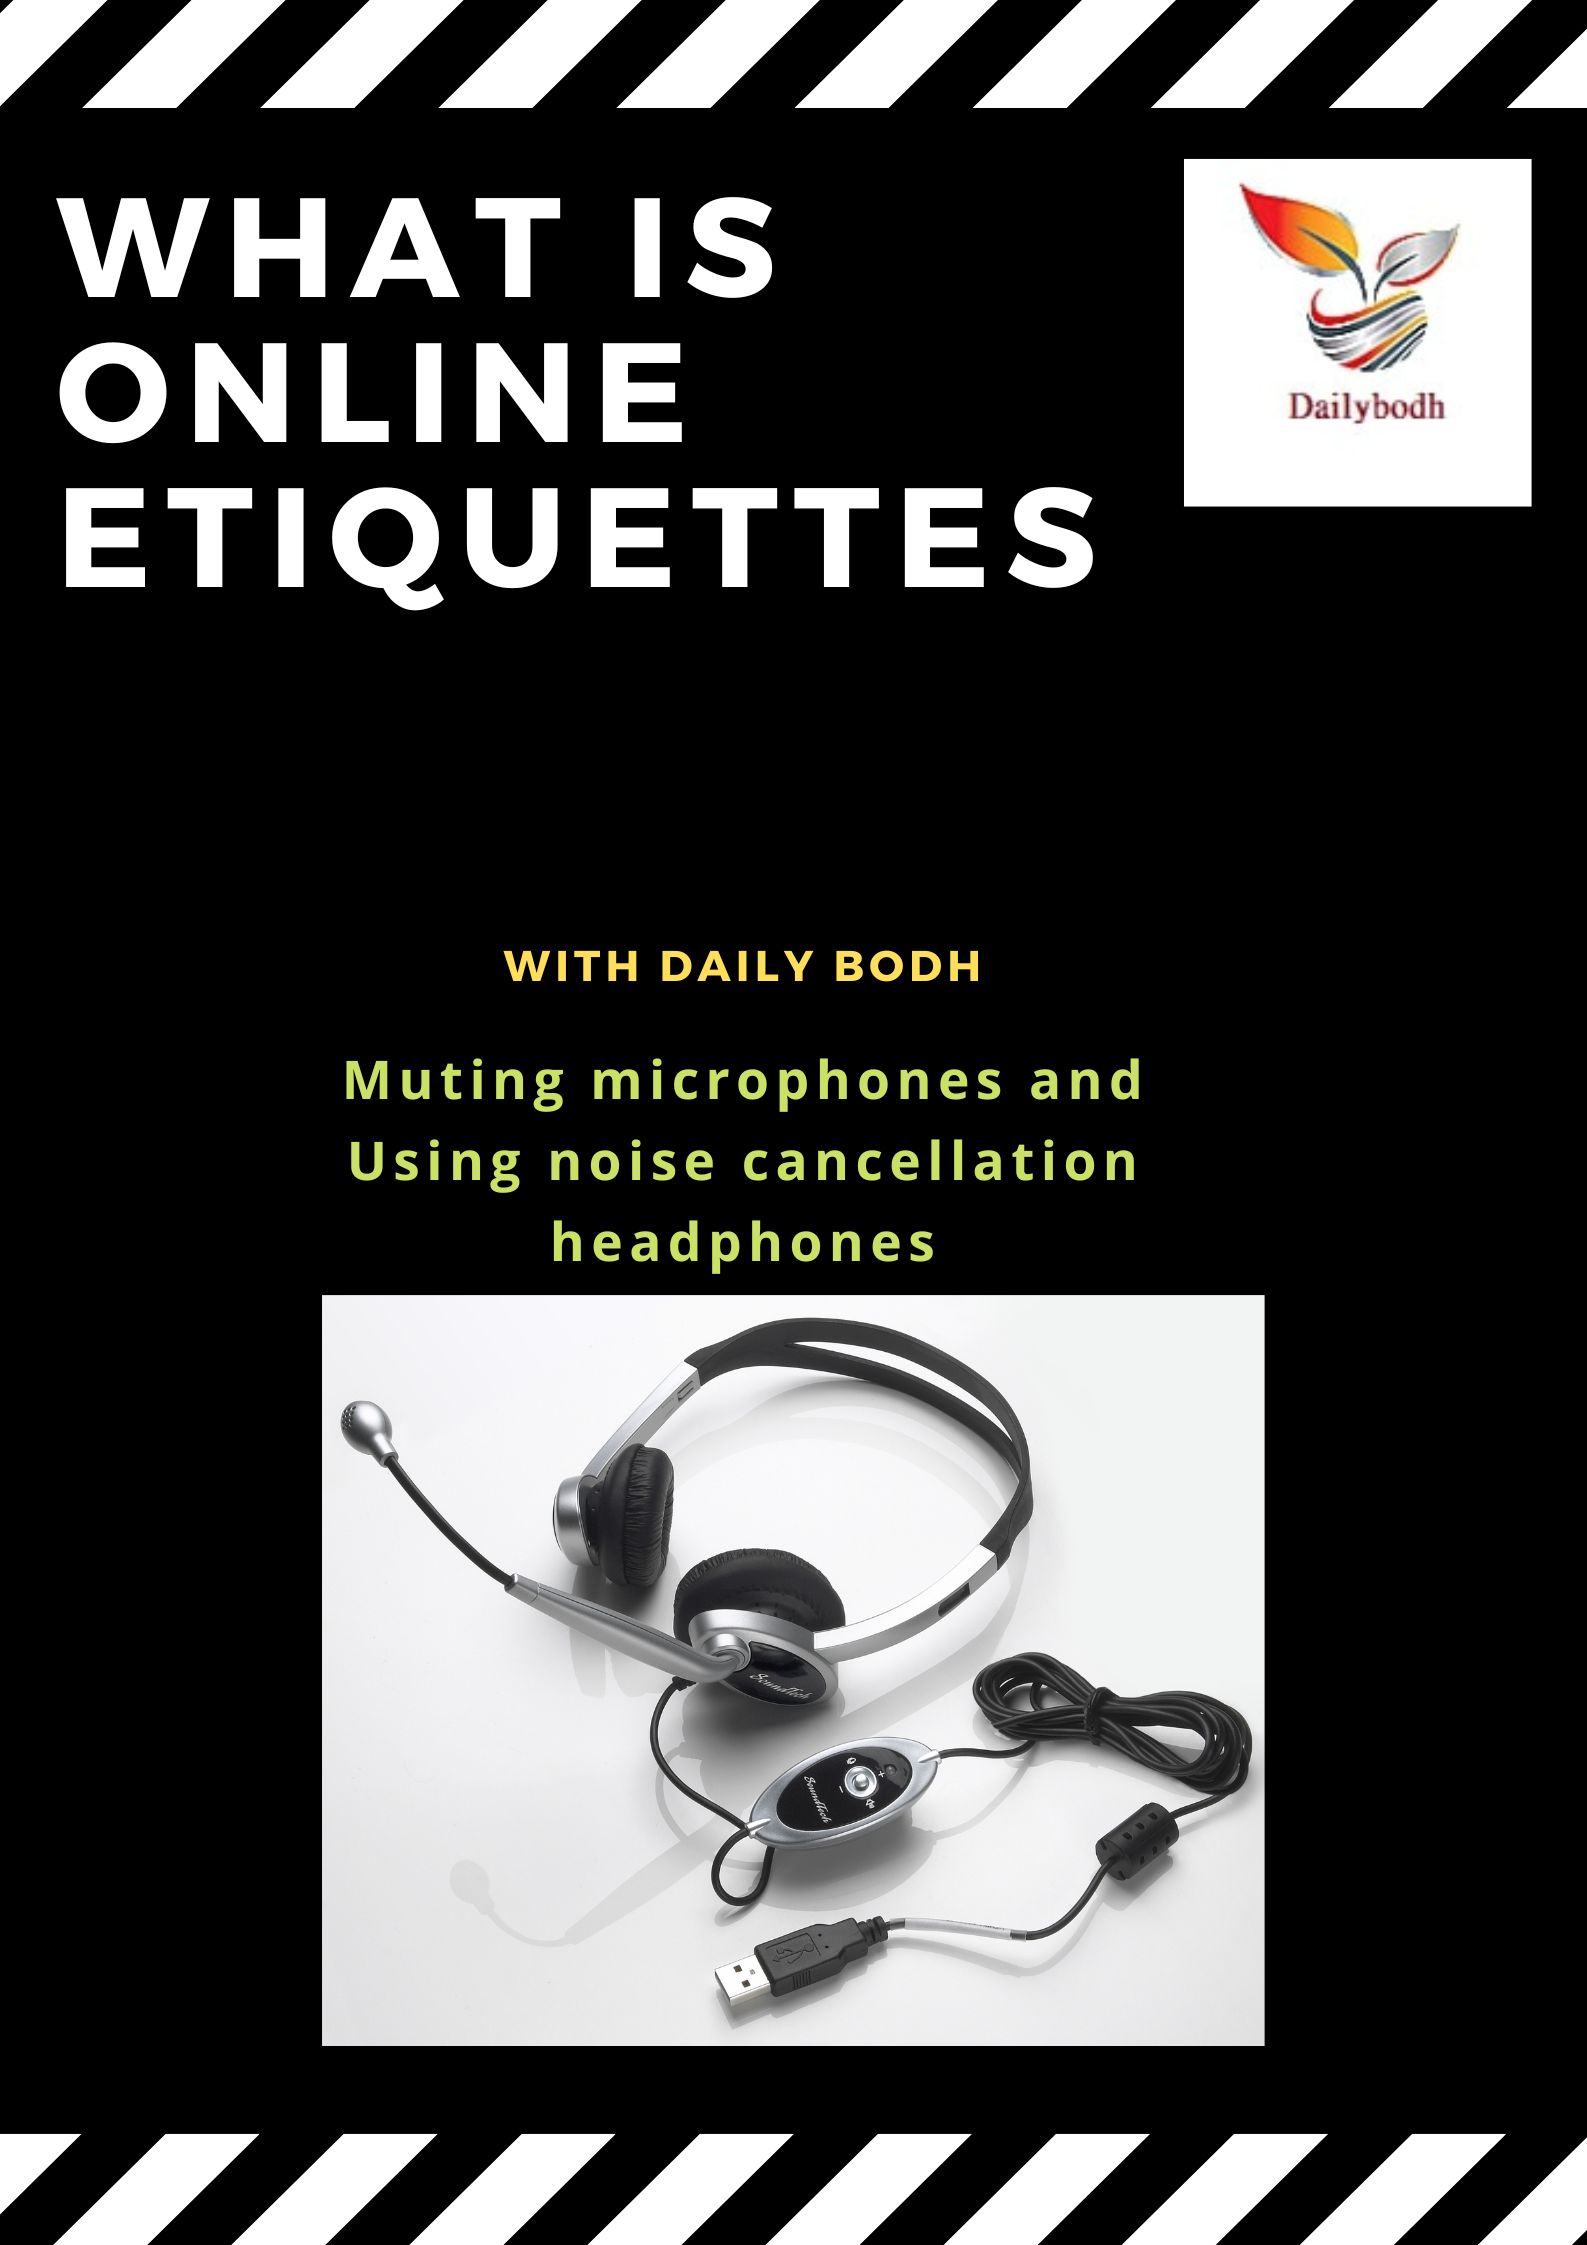 Muting microphones and Using noise cancellation headphones (What is Online Etiquettes)